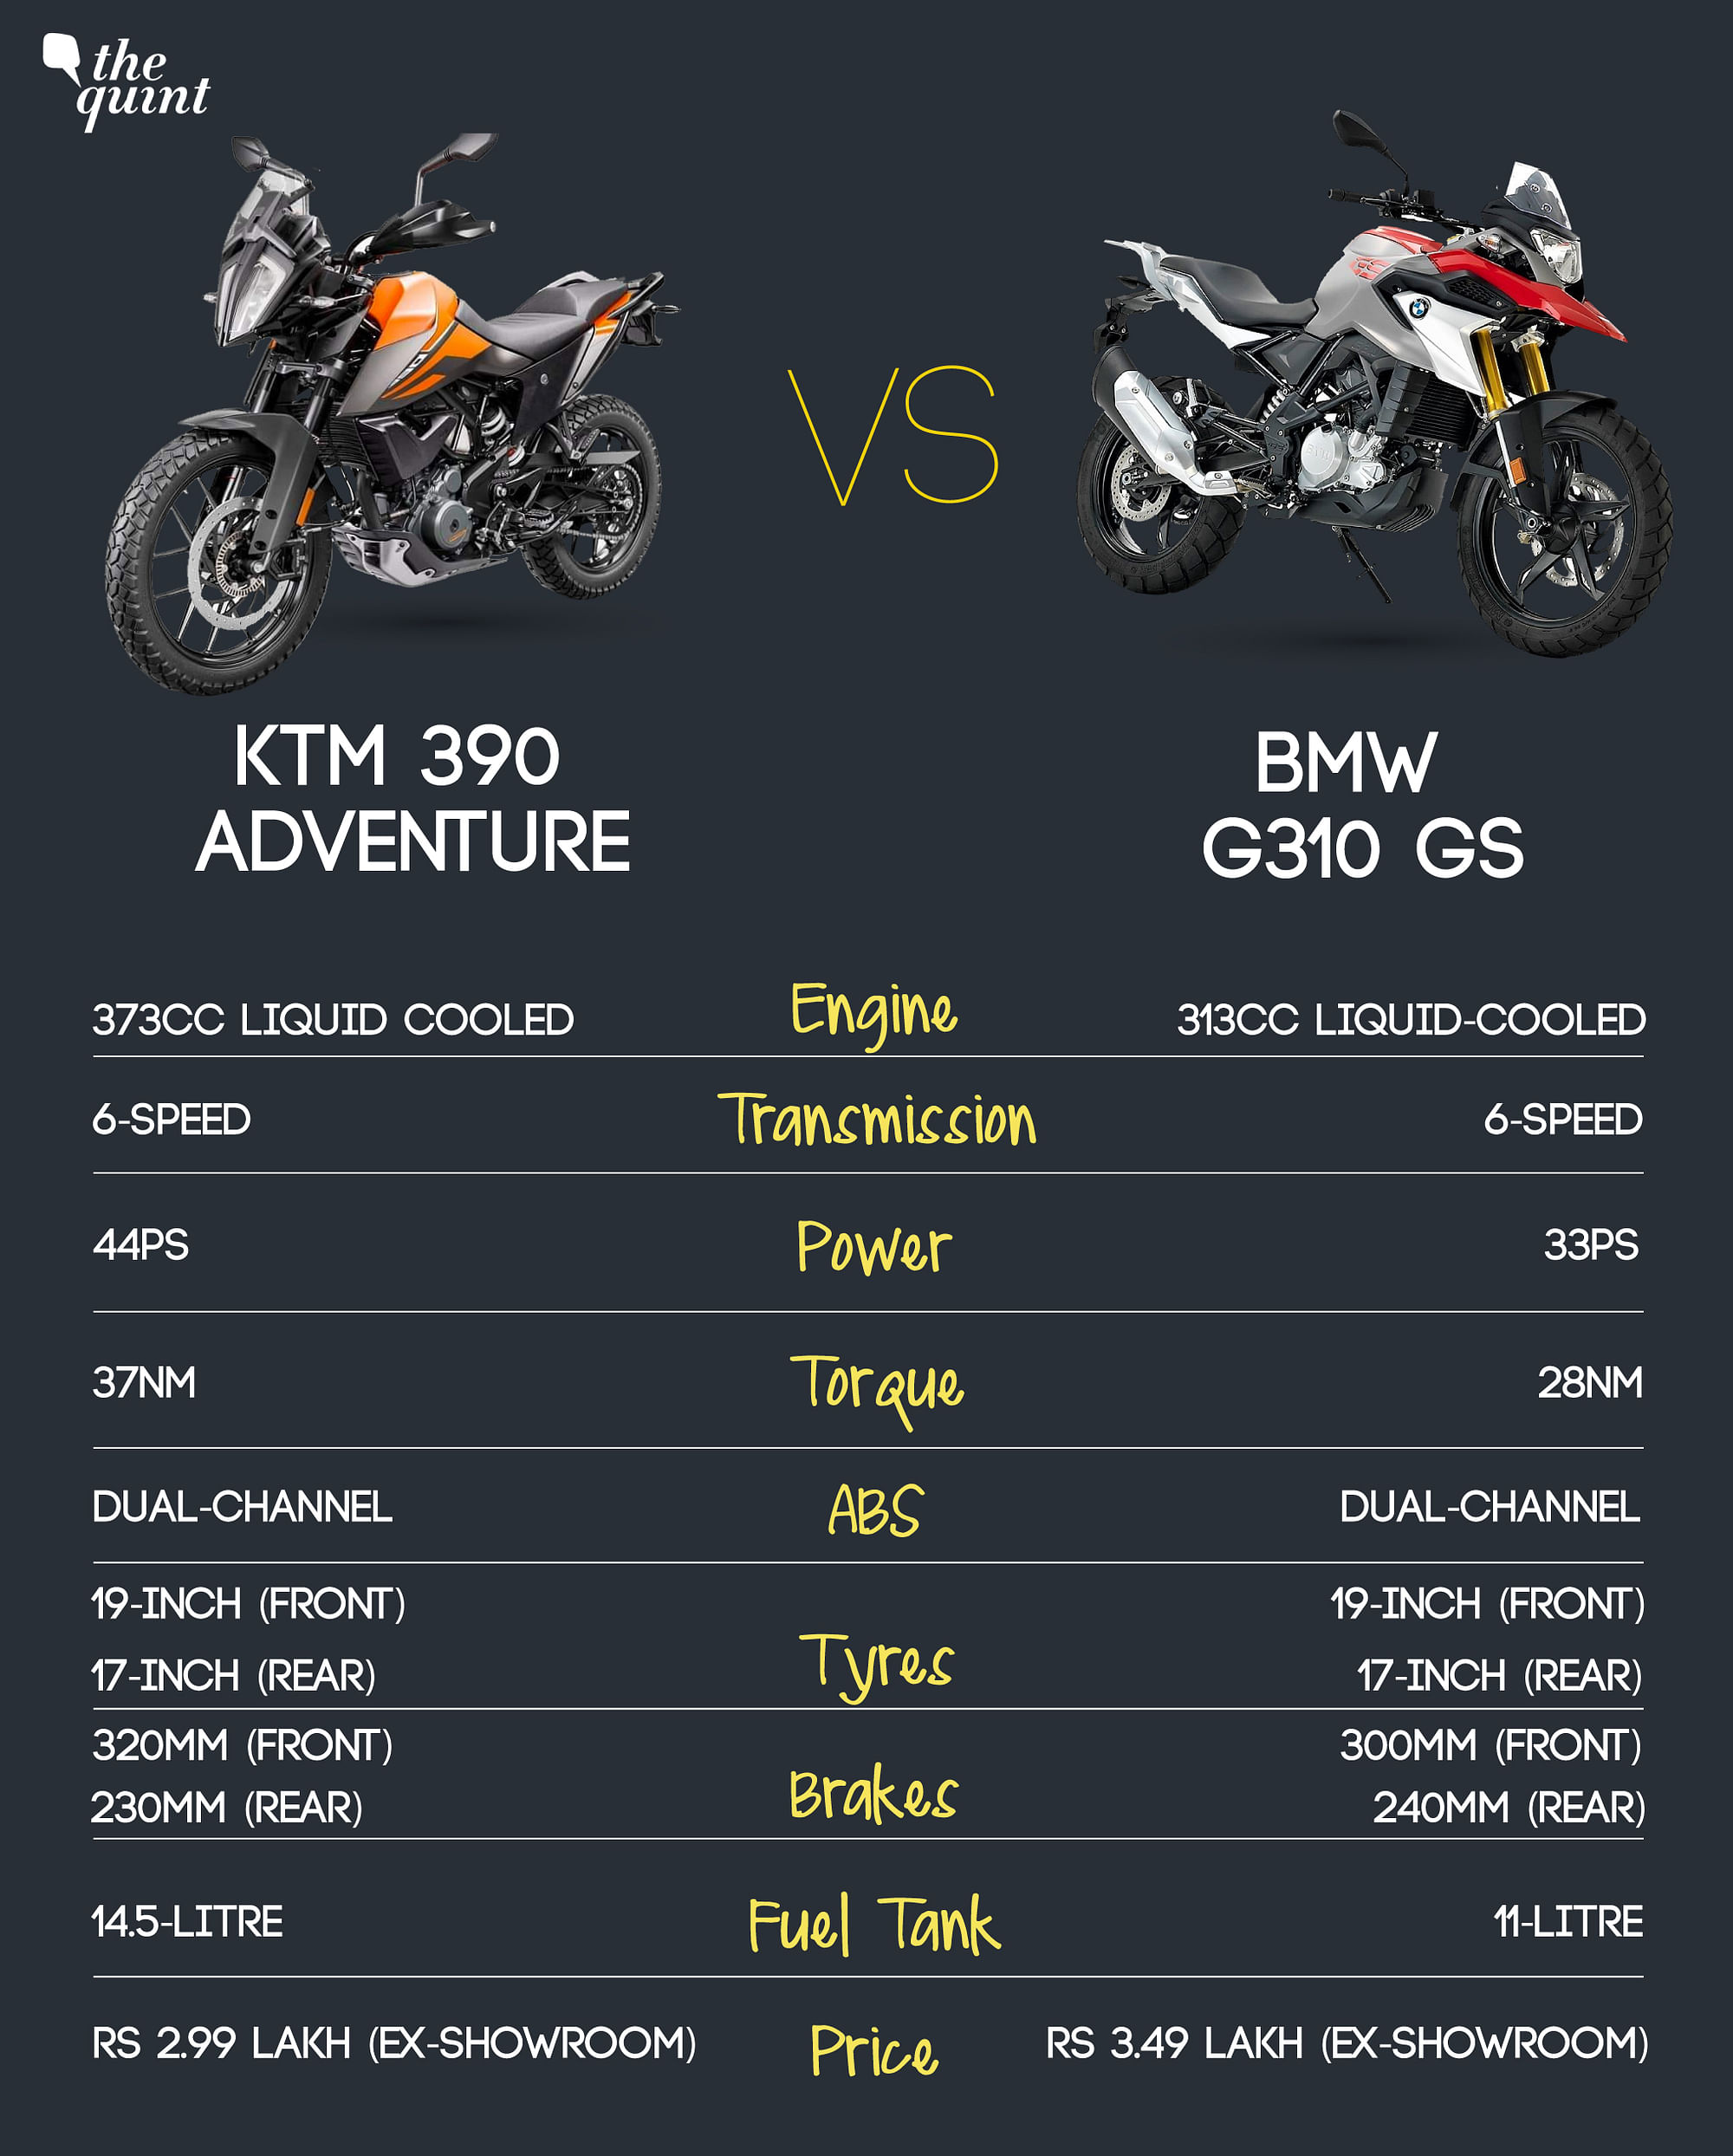 Ktm 390 Adventure Vs Bmw G310 Gs Price Features Comparison And More